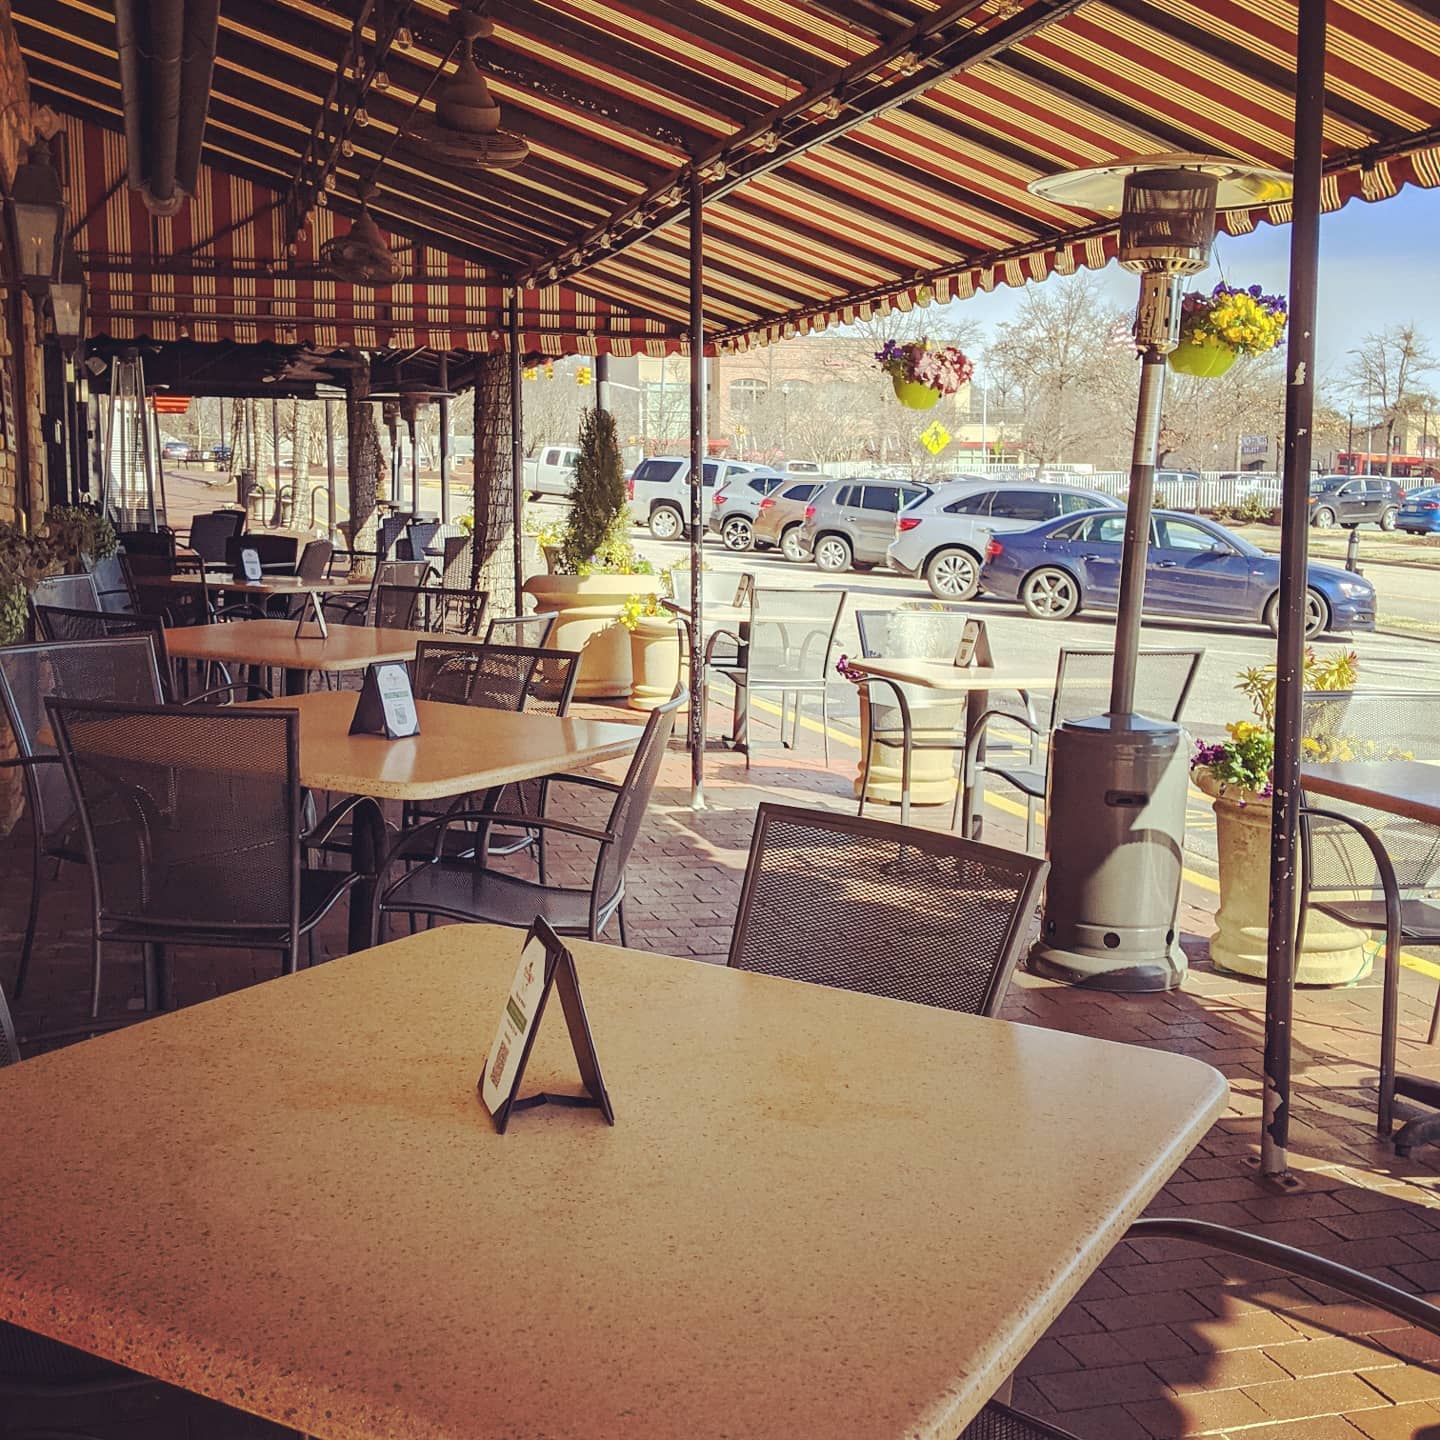 Italian Food and Patio Seating | Raleigh NC (pic: facebook.com/lifehappenspizzahelps)